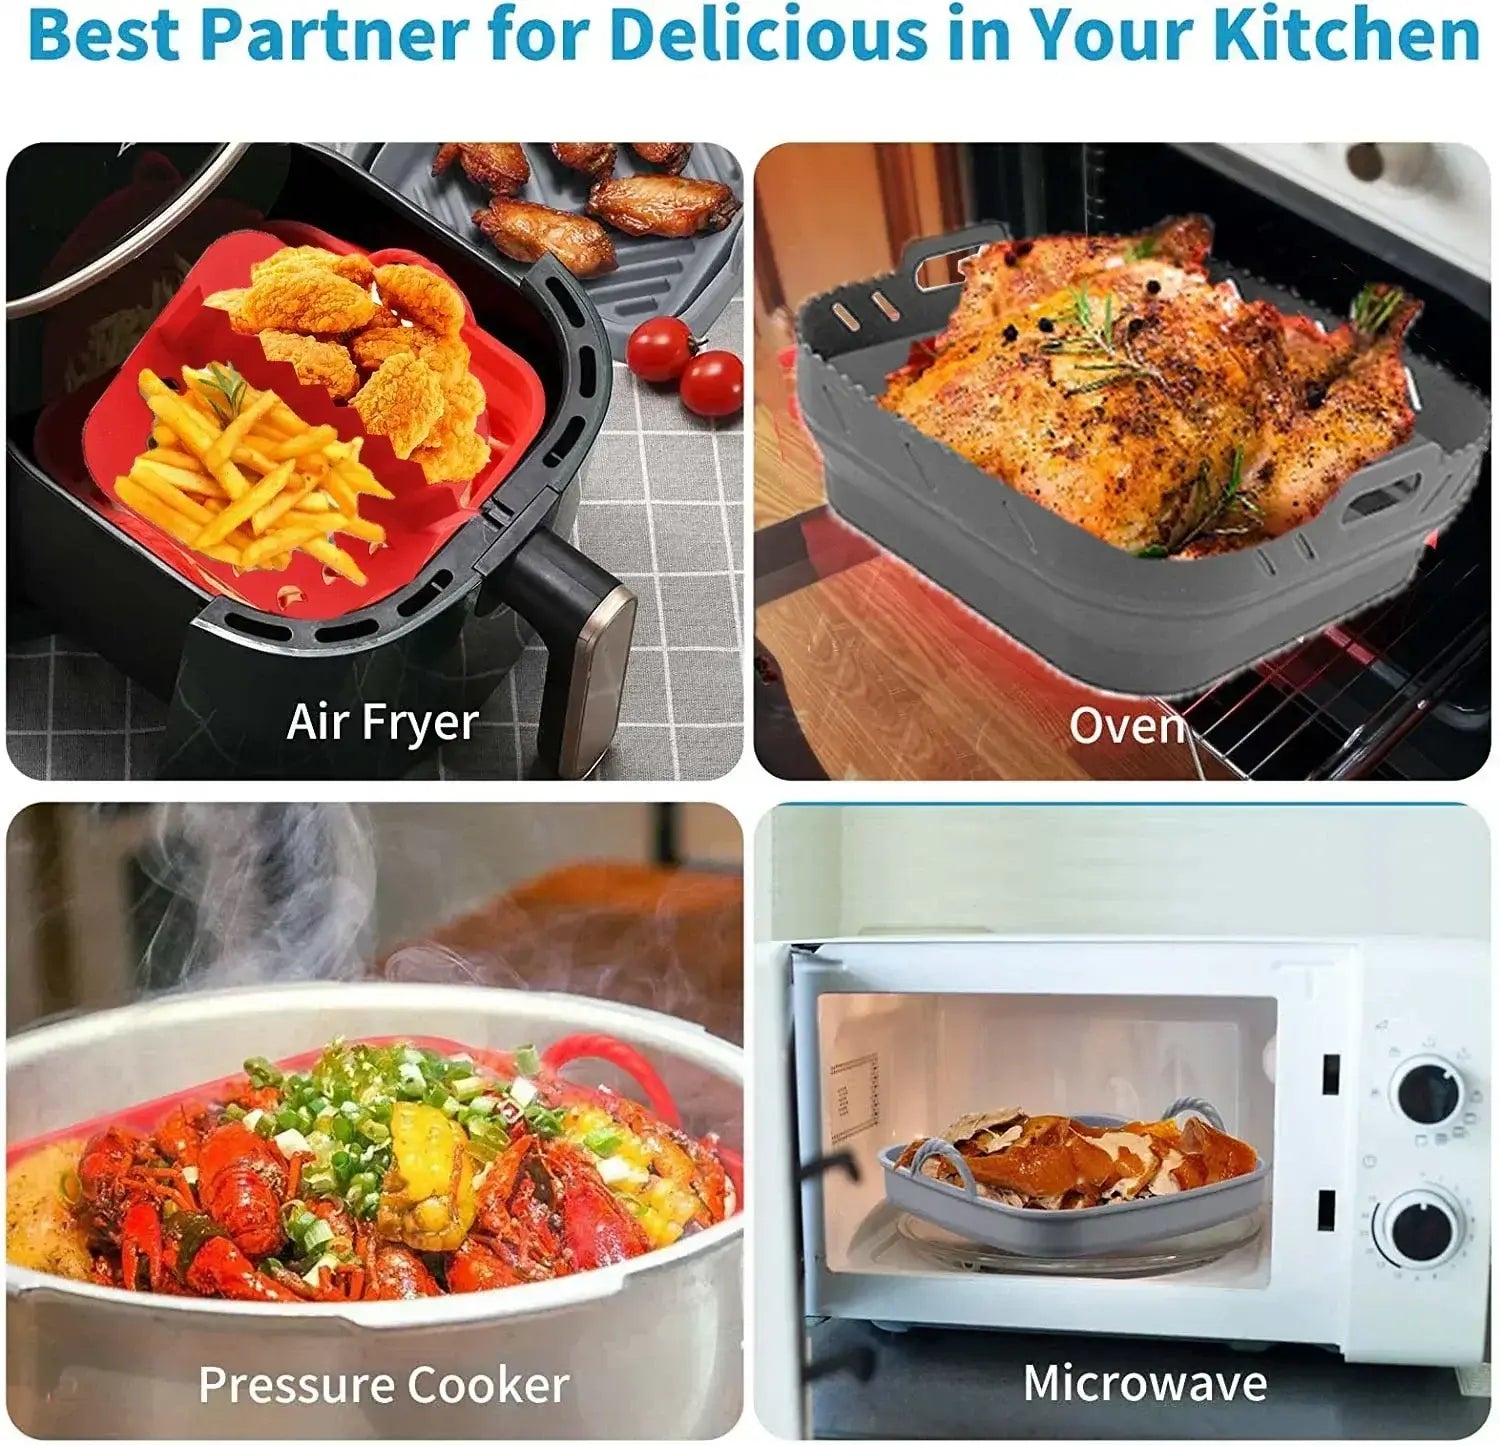 4 different scenarios for cooking: Air fryer, Oven, Pressure cooker and Microwave.